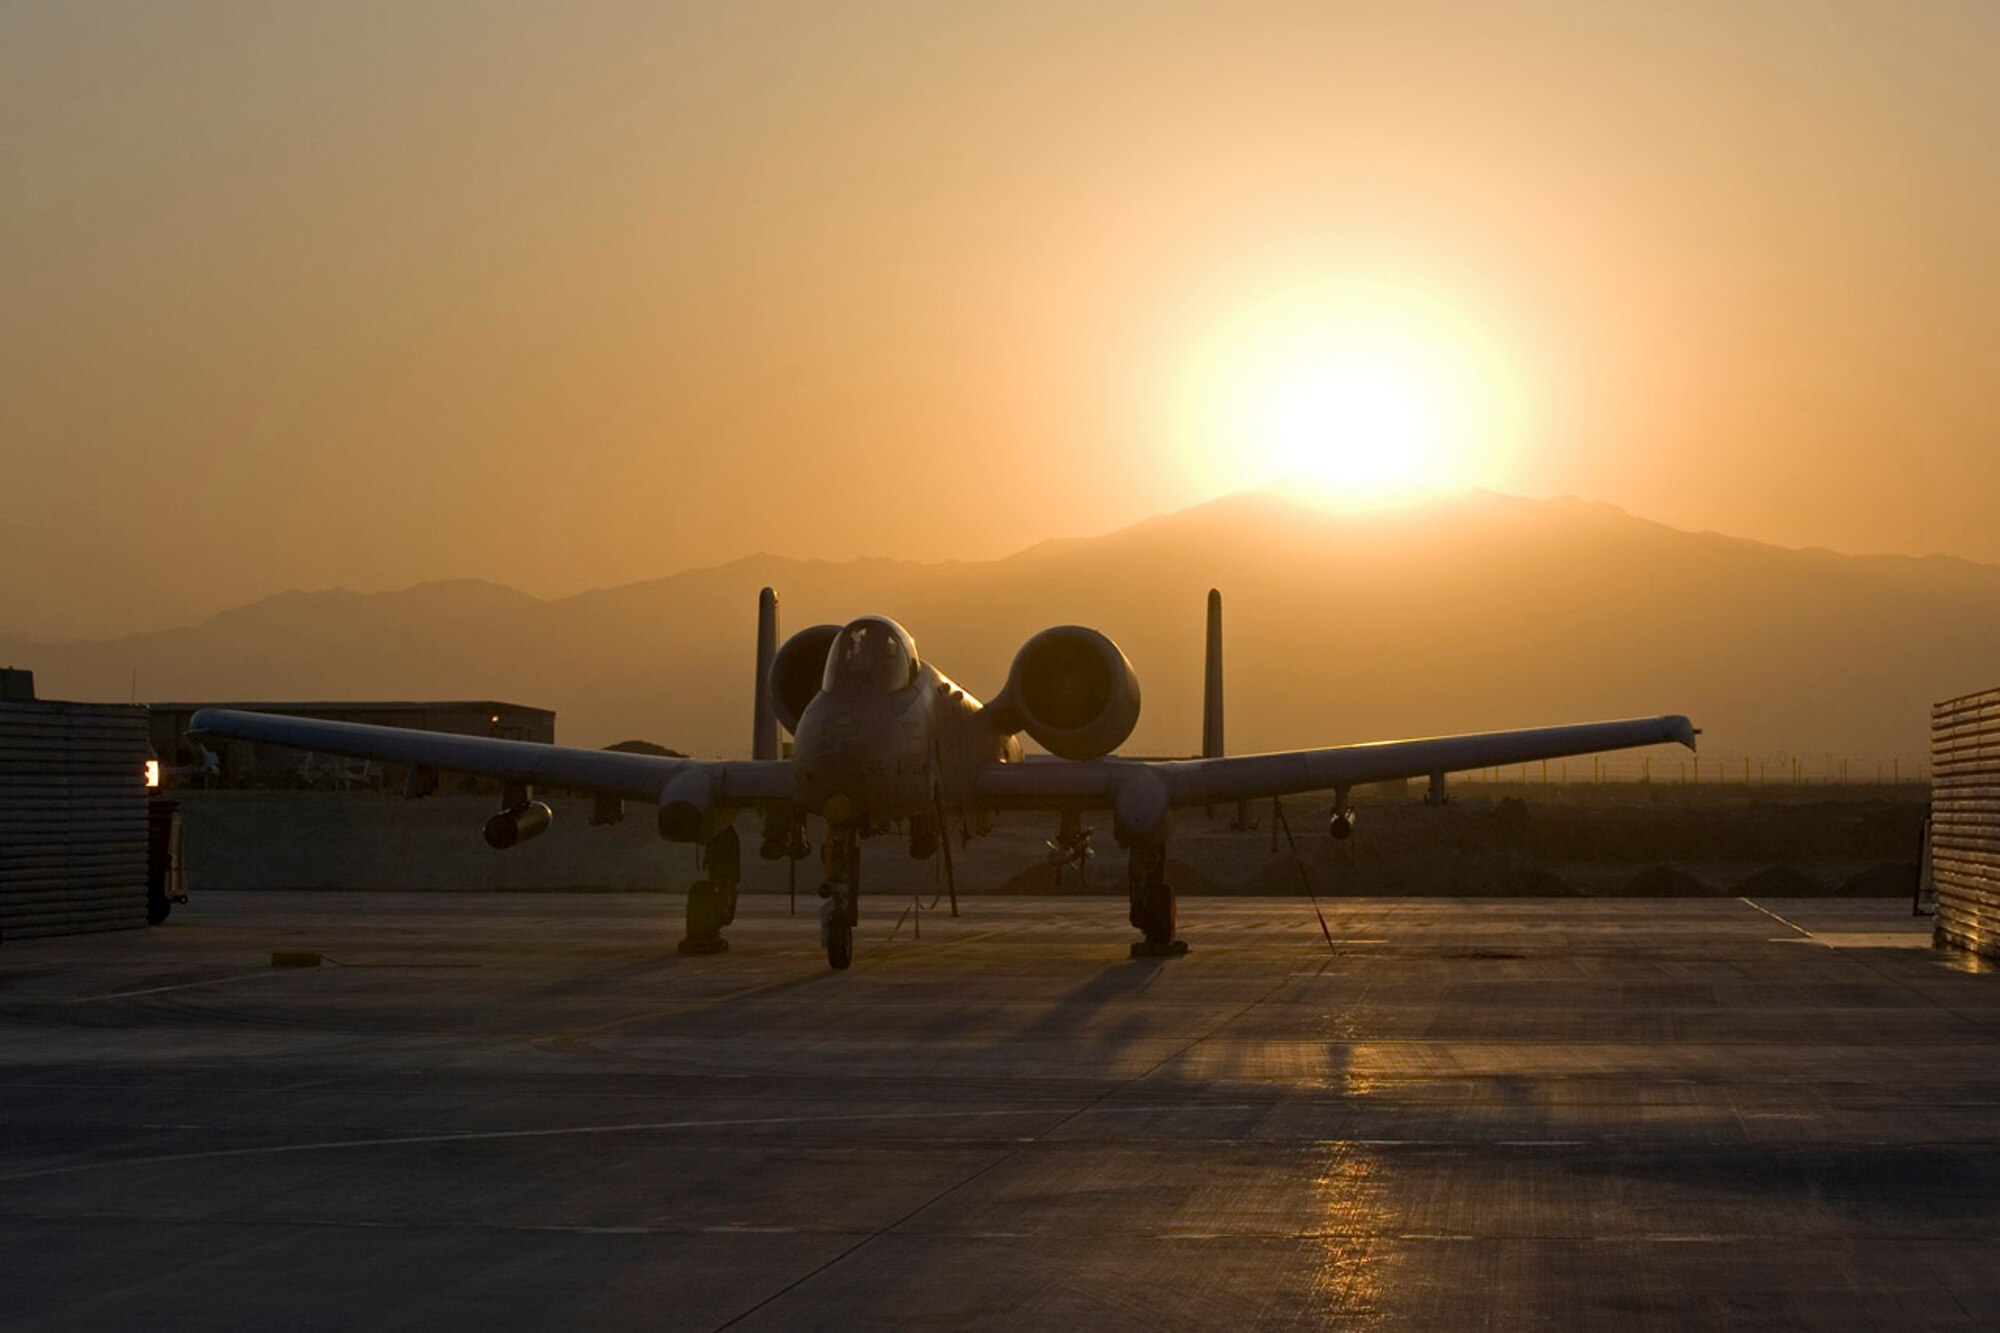 BAGRAM AIR BASE, Afghanistan - An A-10 Thunderbolt II greets the start of a new day on the flightline here Nov. 22, 2007. (Photo by Col Tim Grams)